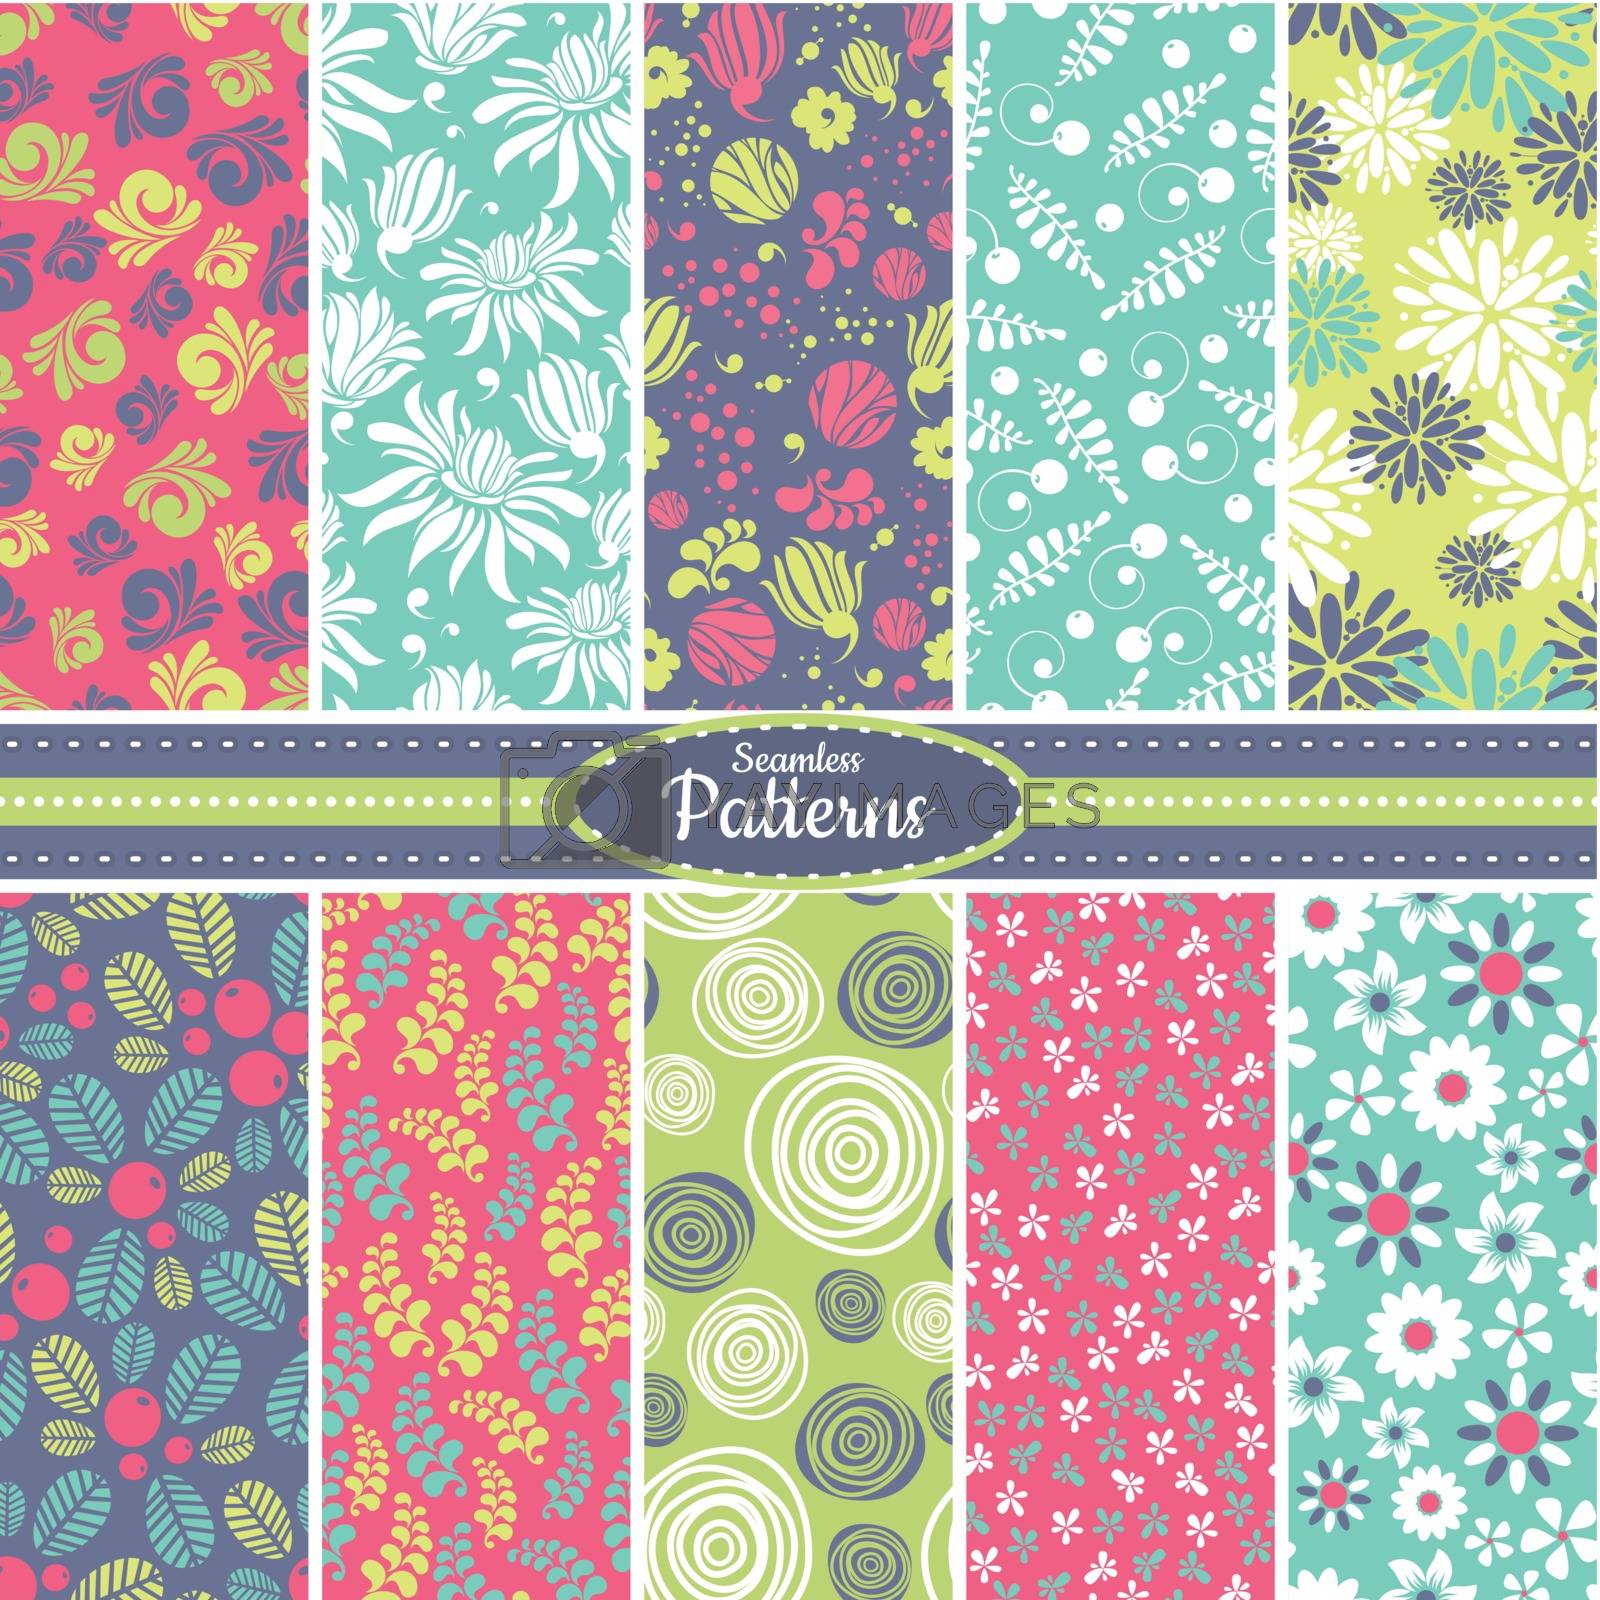 Collection of 10 floral colorful seamless pattern background. Great for web page backgrounds, wallpapers, interiors, home decor, apparel, etc. Vector file includes pattern swatch for each pattern.